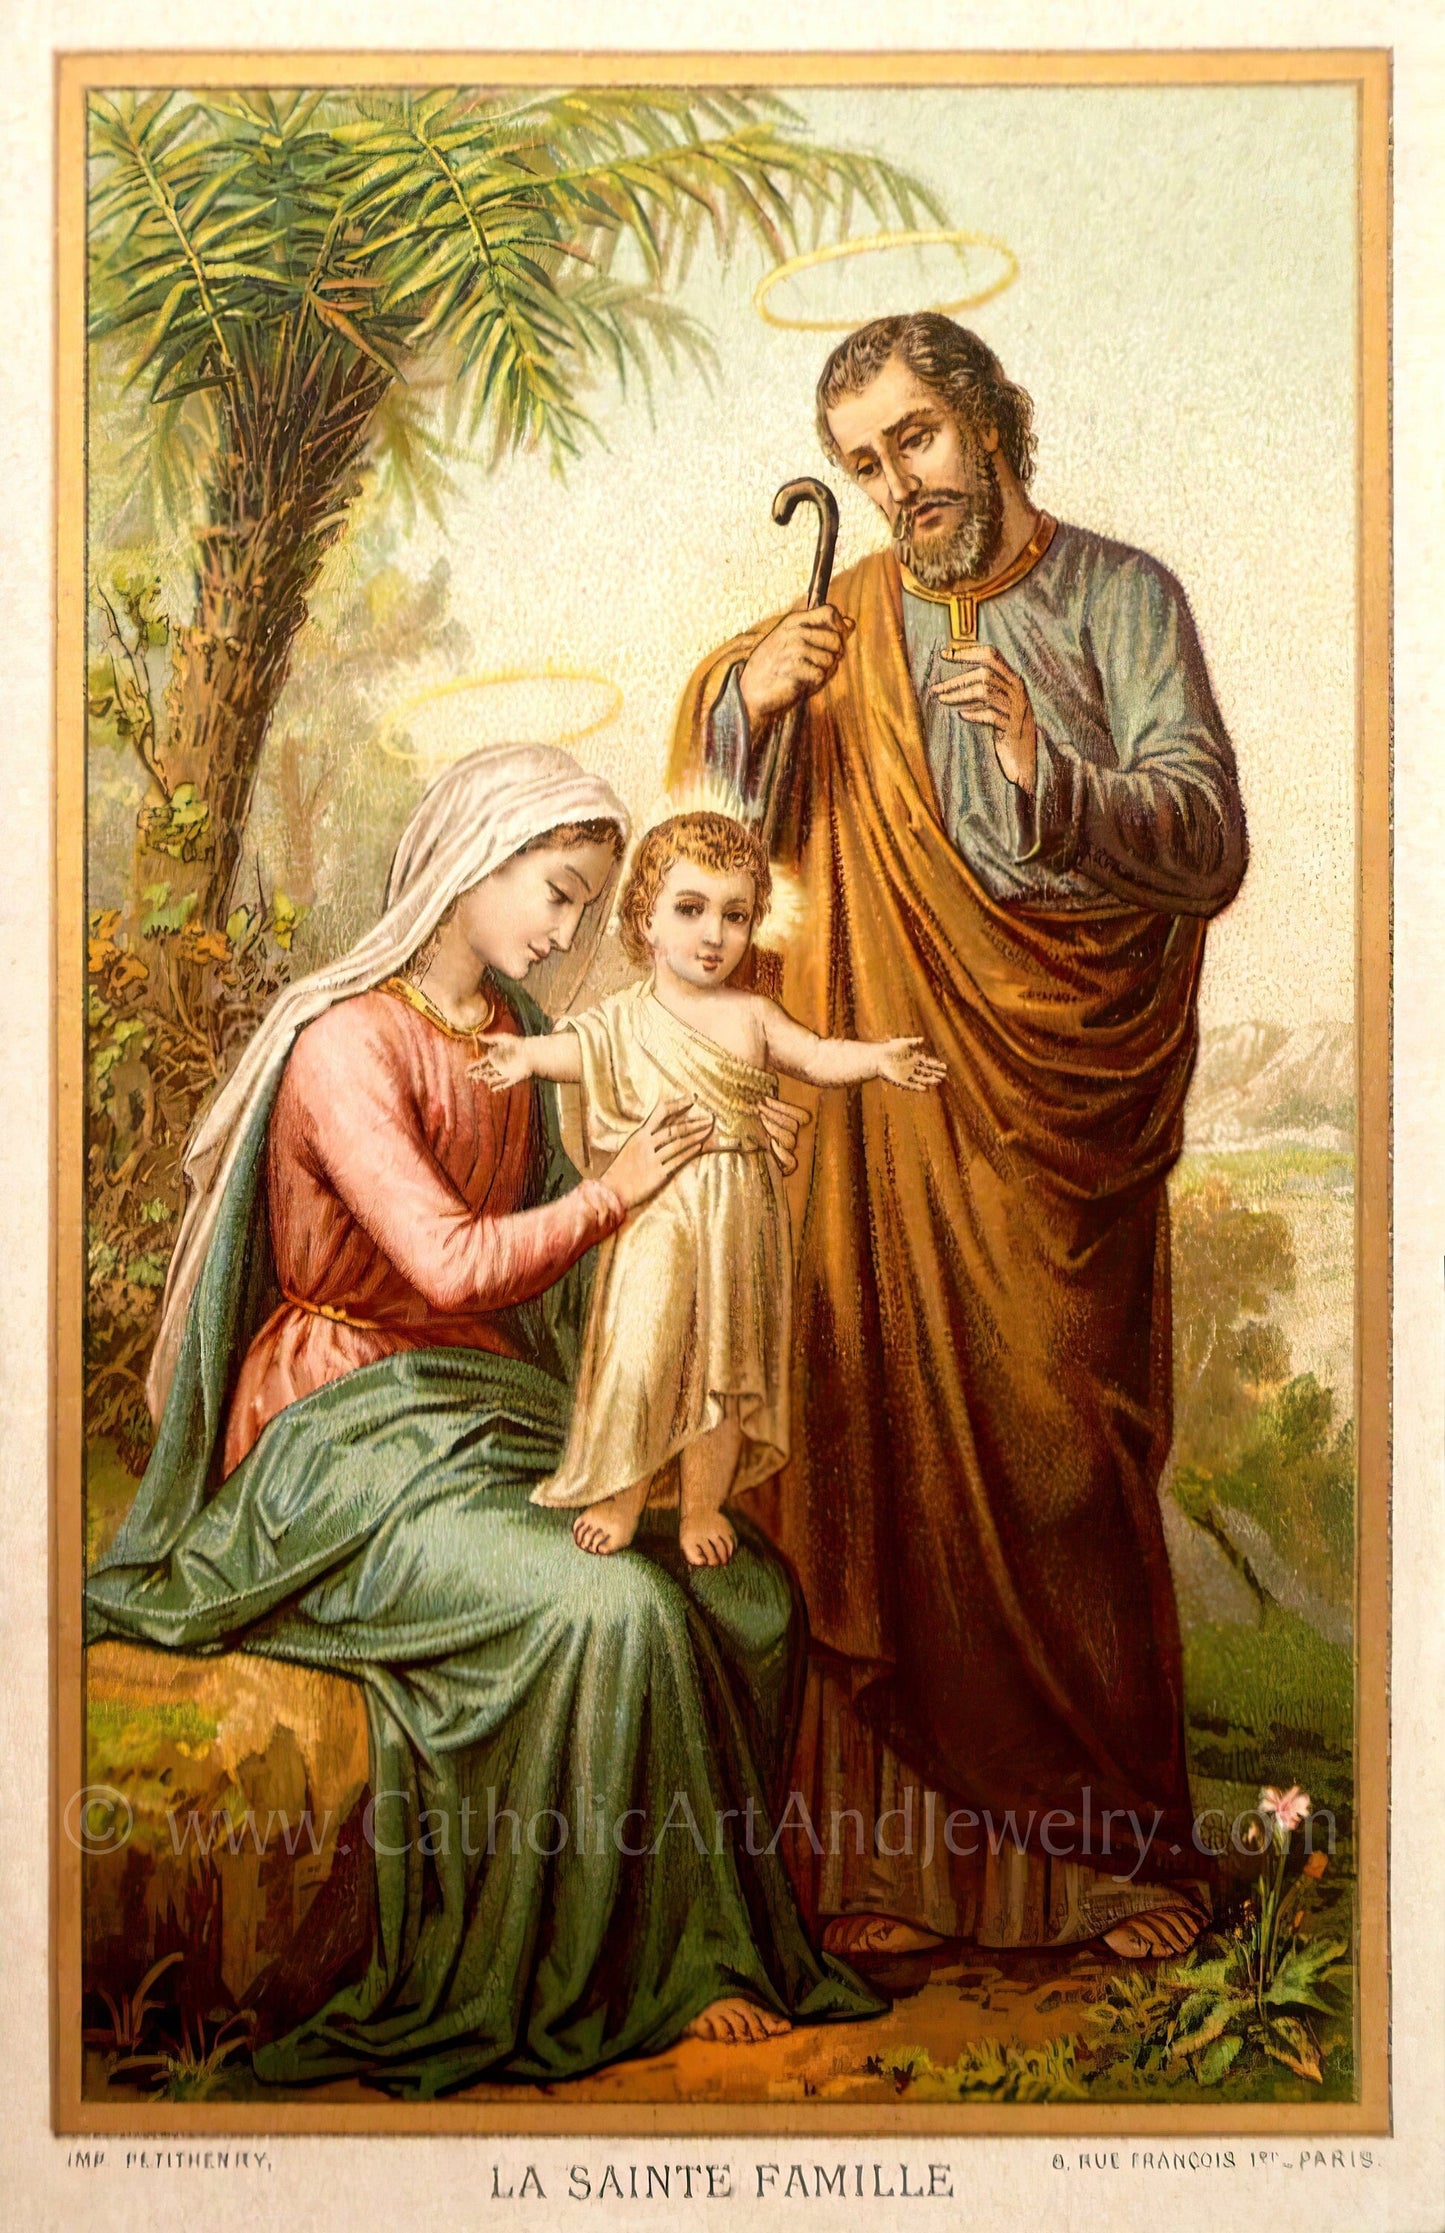 The Holy Family in Egypt – Based on an Vintage Holy Card – Catholic Art Print – Archival Quality